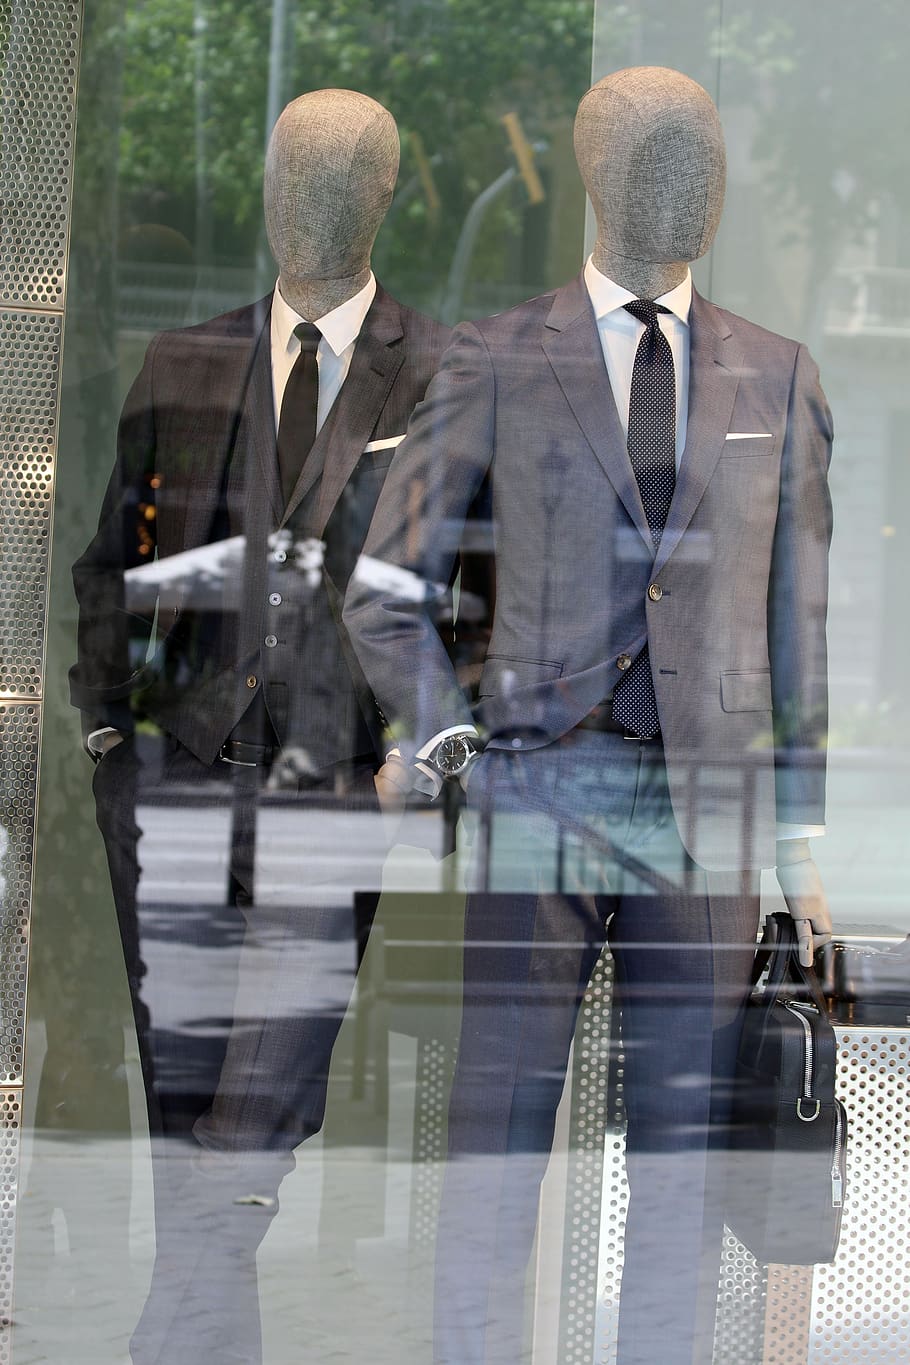 reflection, costume, tie, city, lisbon, mannequin, business person, businessman, business, well-dressed